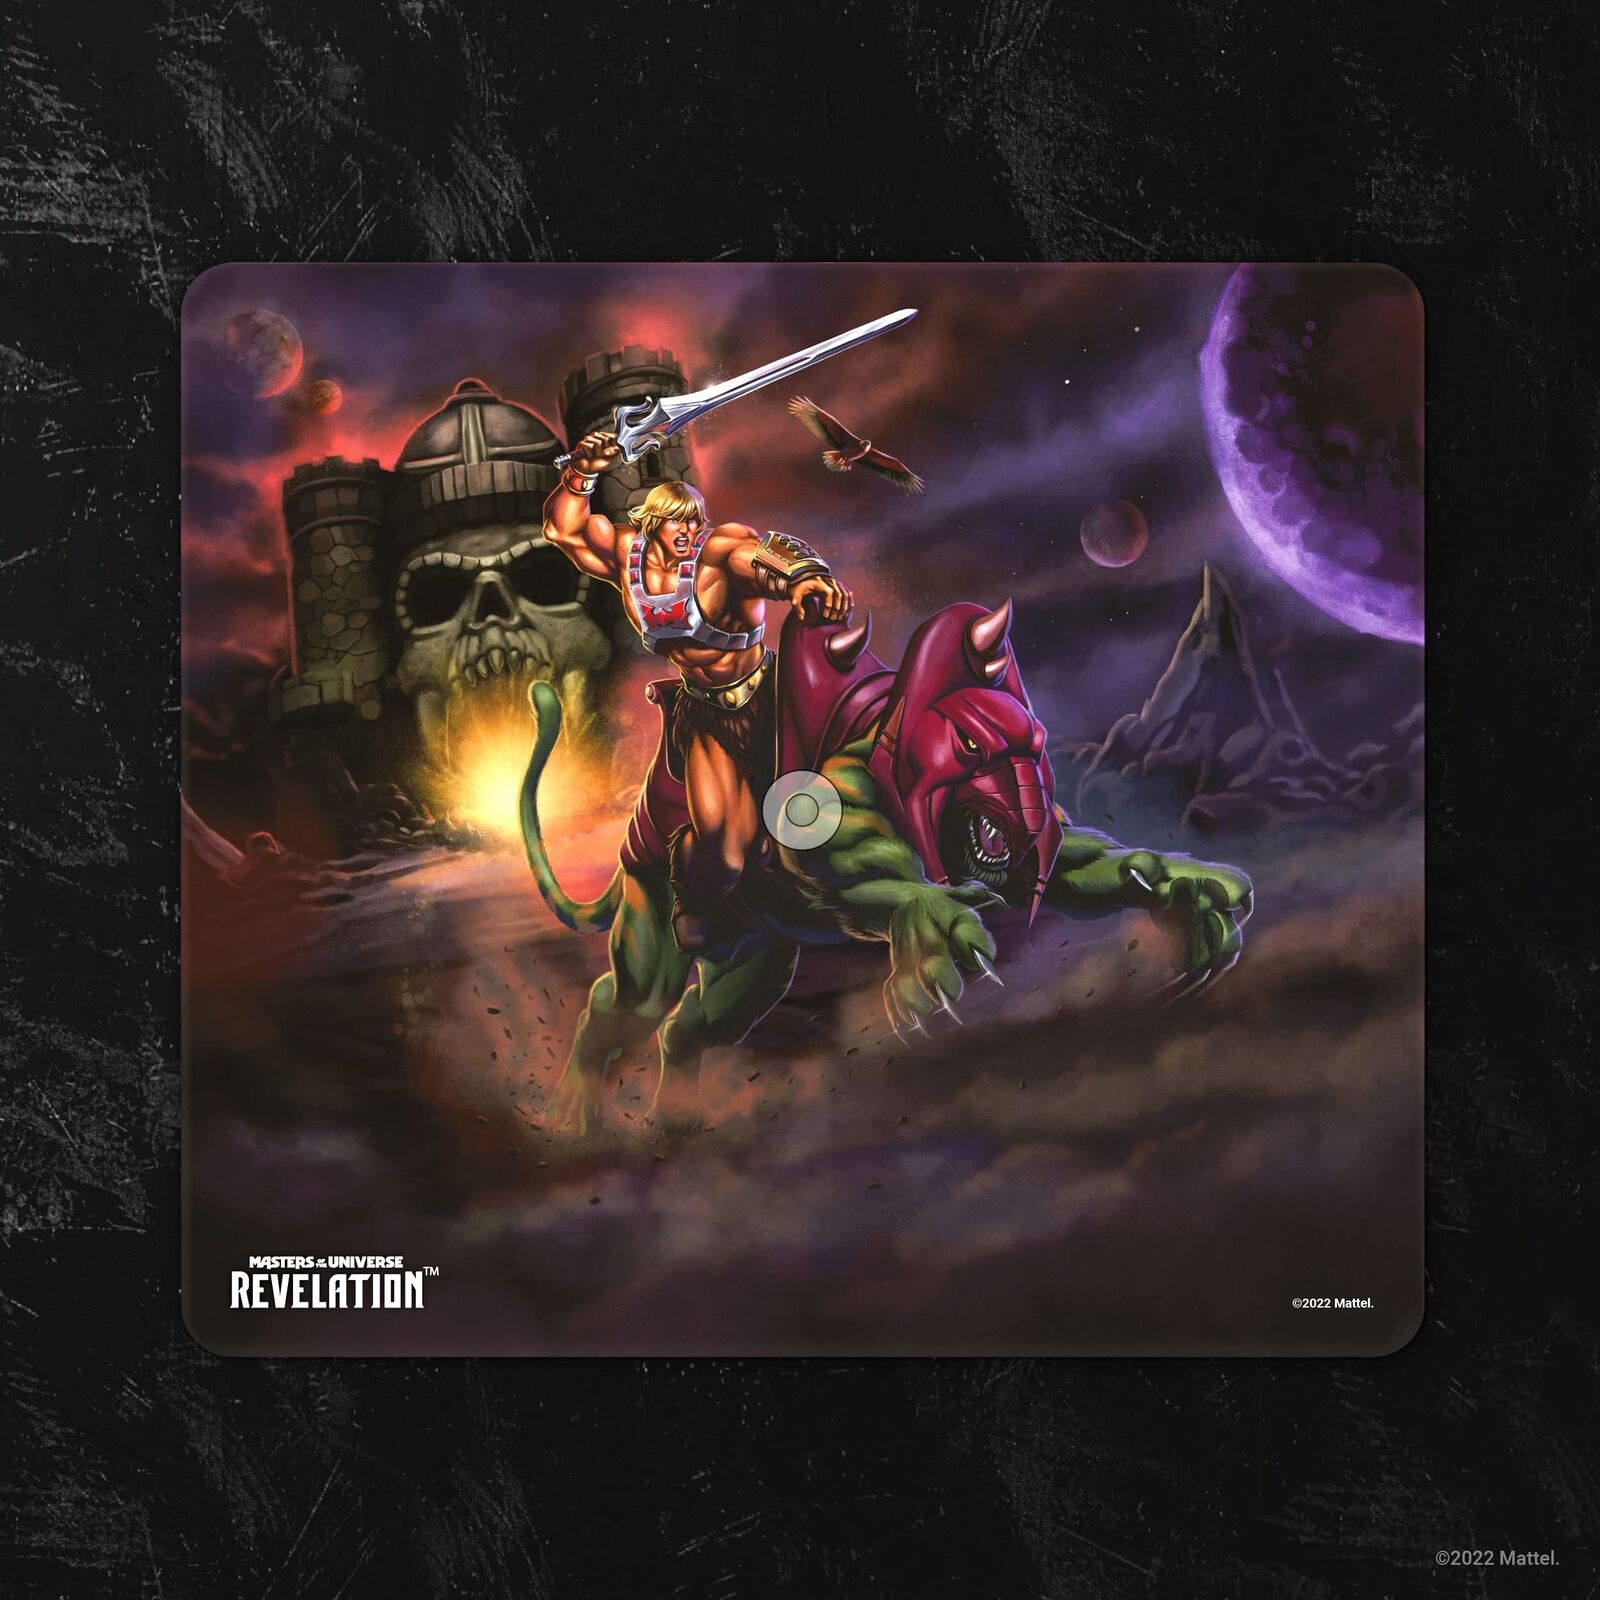 Heo of The Universe Revelation Mouse Mat He-Man and Battle Cat 25 x 22 cm